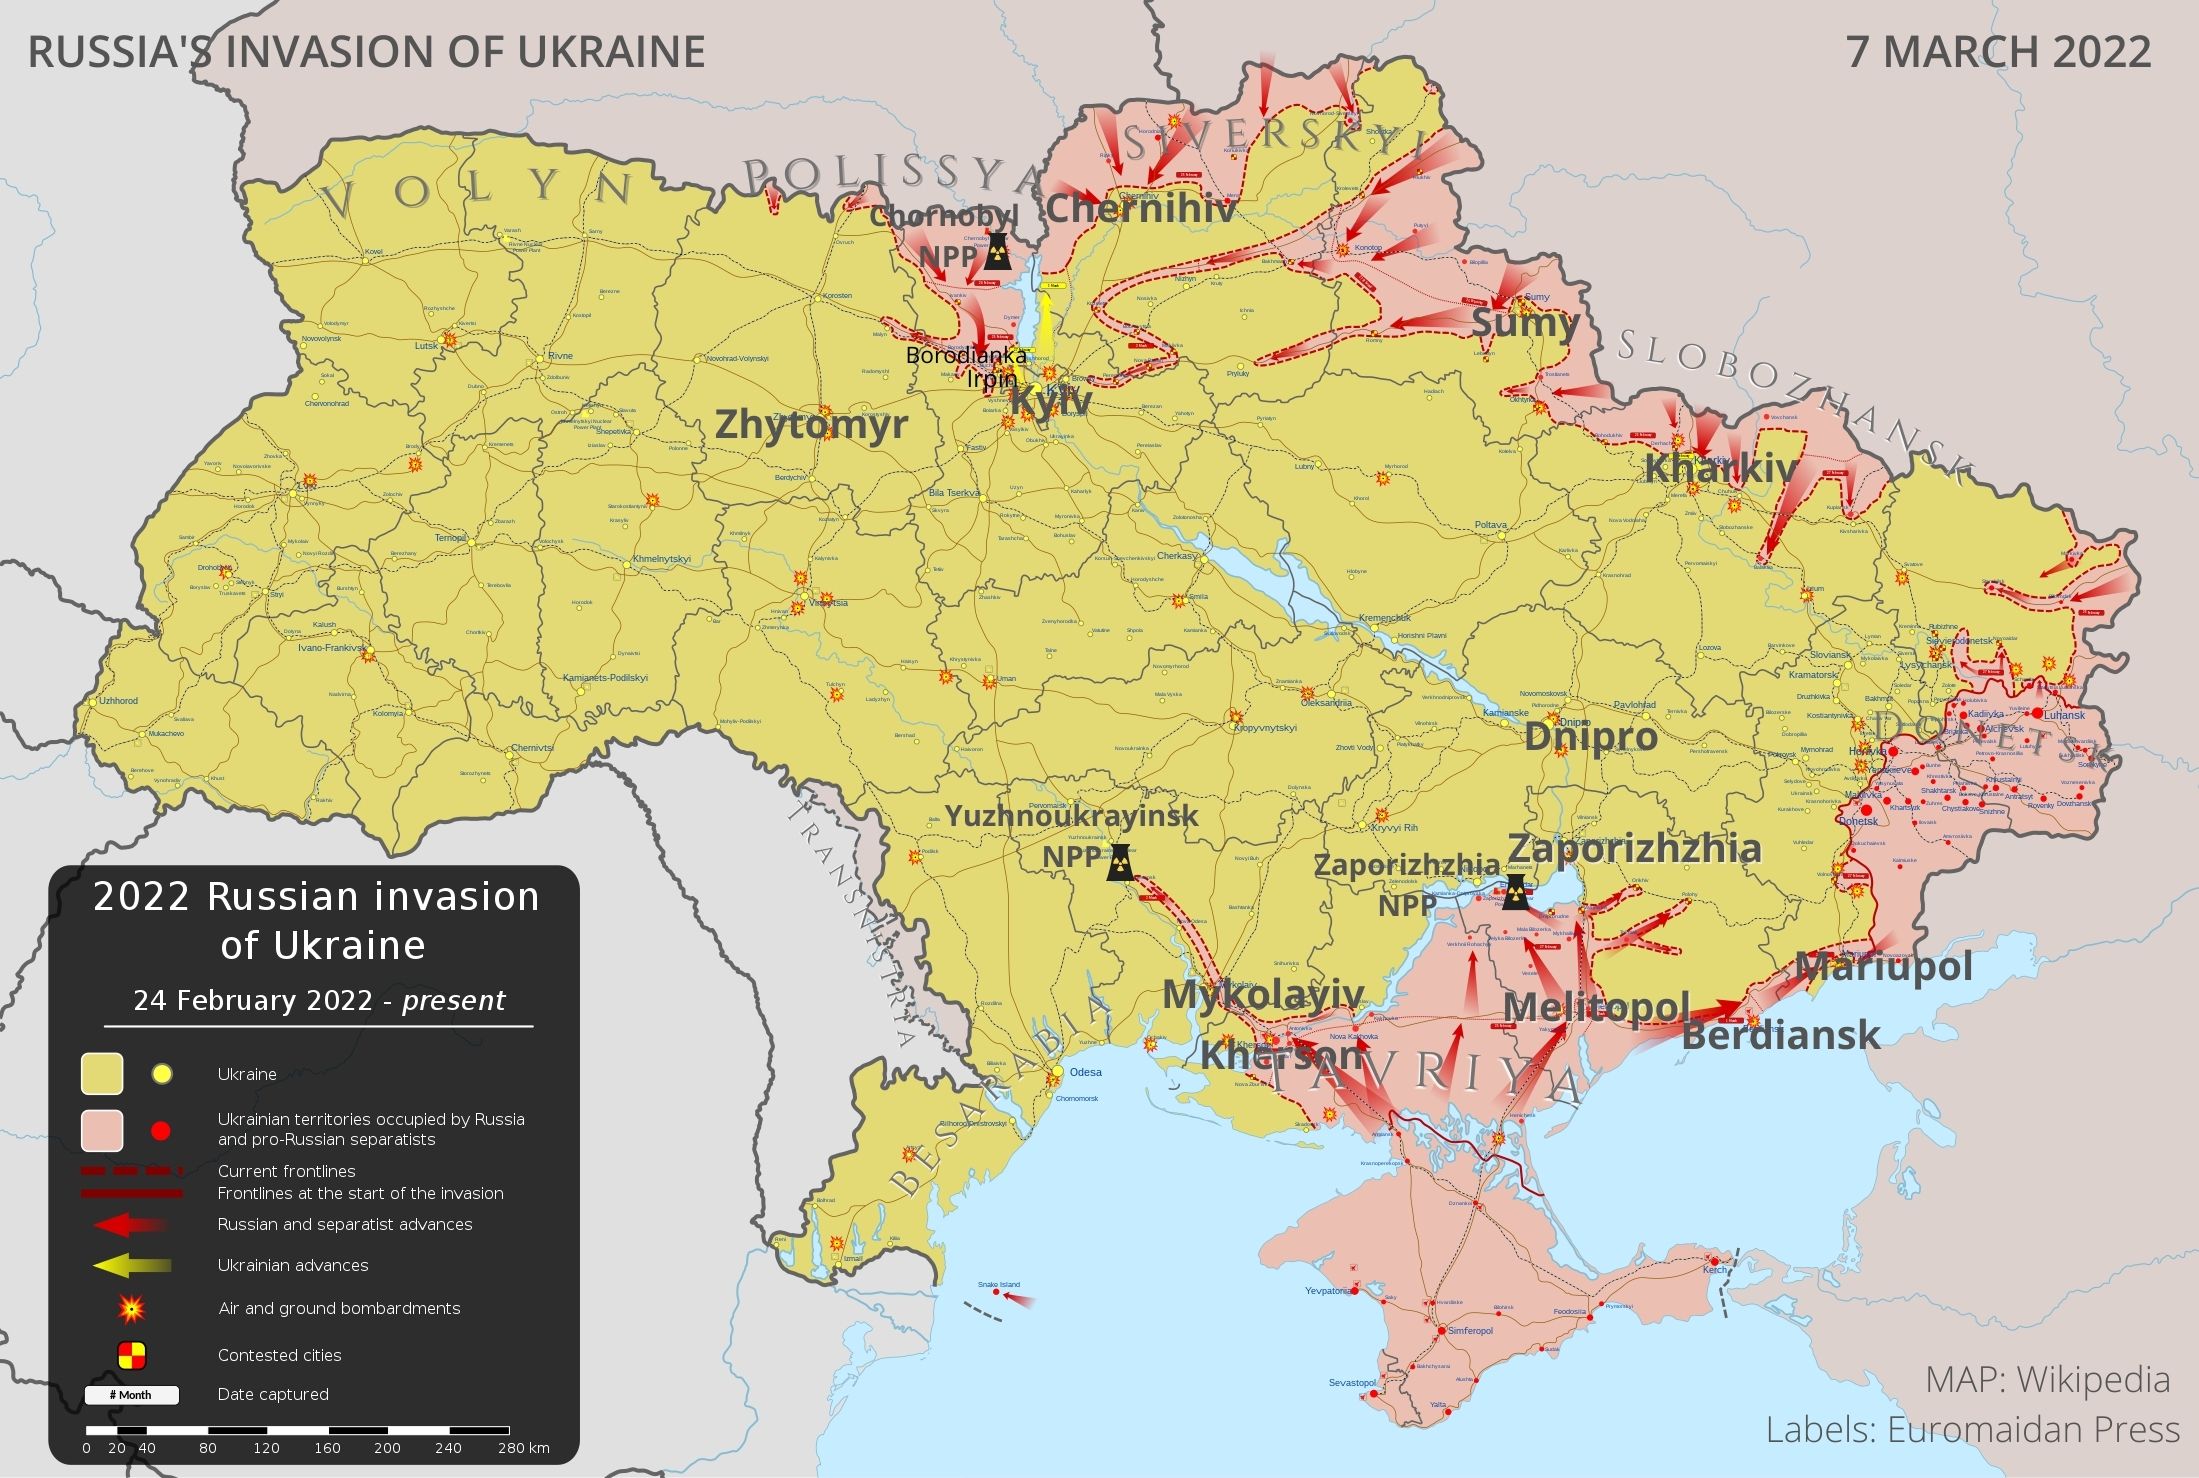 War in Ukraine, day 12: Russia continues efforts to encroach on Kyiv ~~